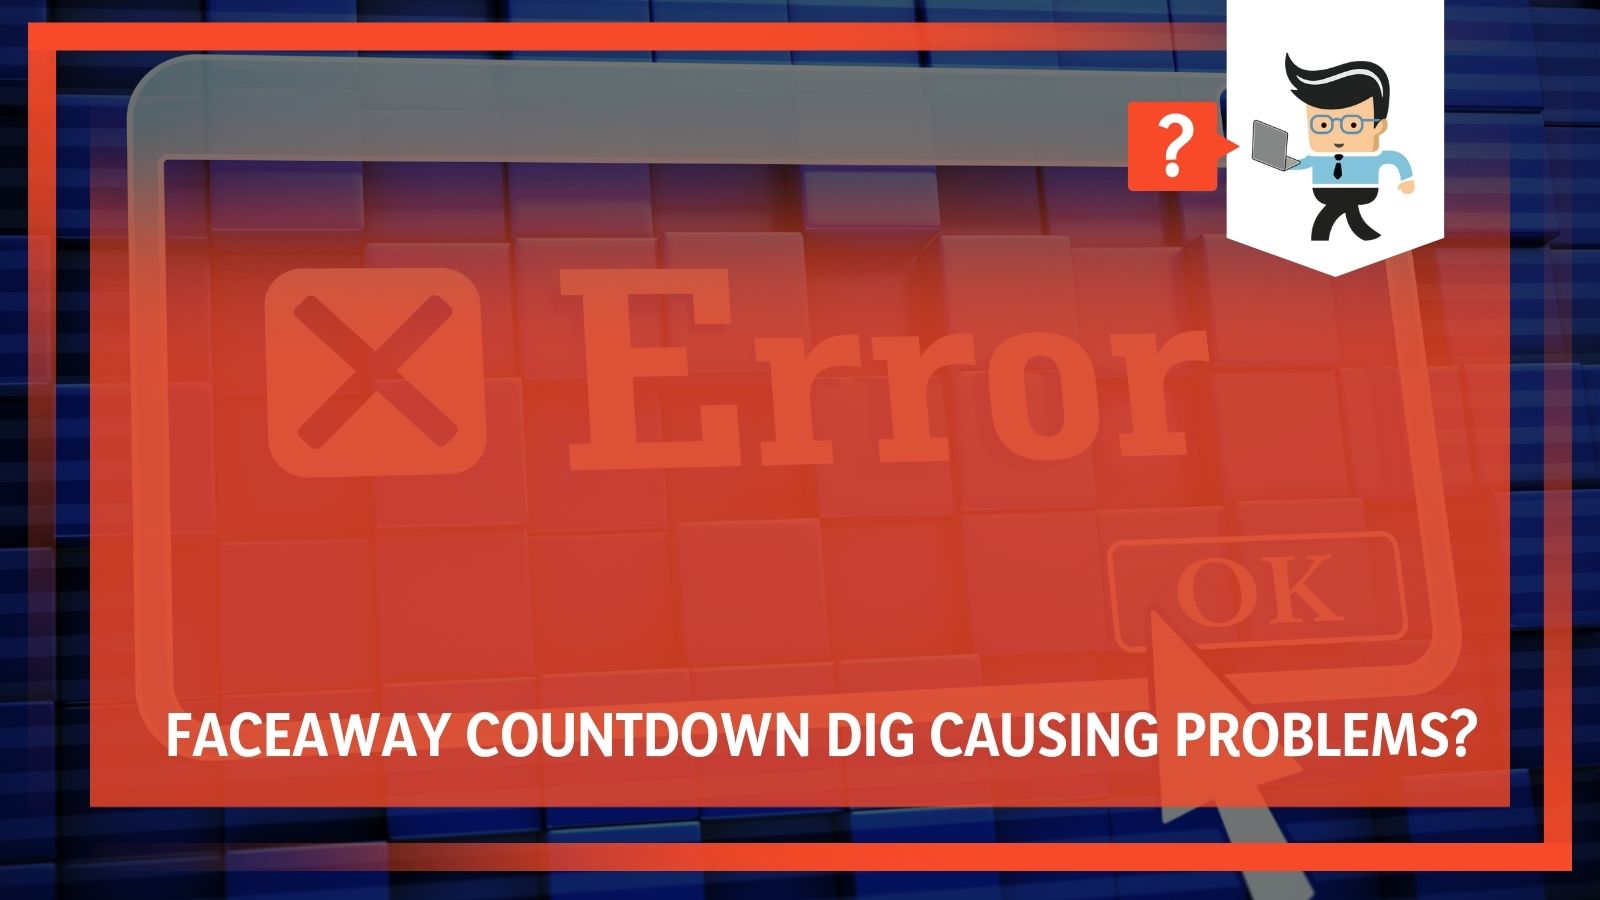 FaceAway Countdown Dig Causing Problems Check Out the Solution Here